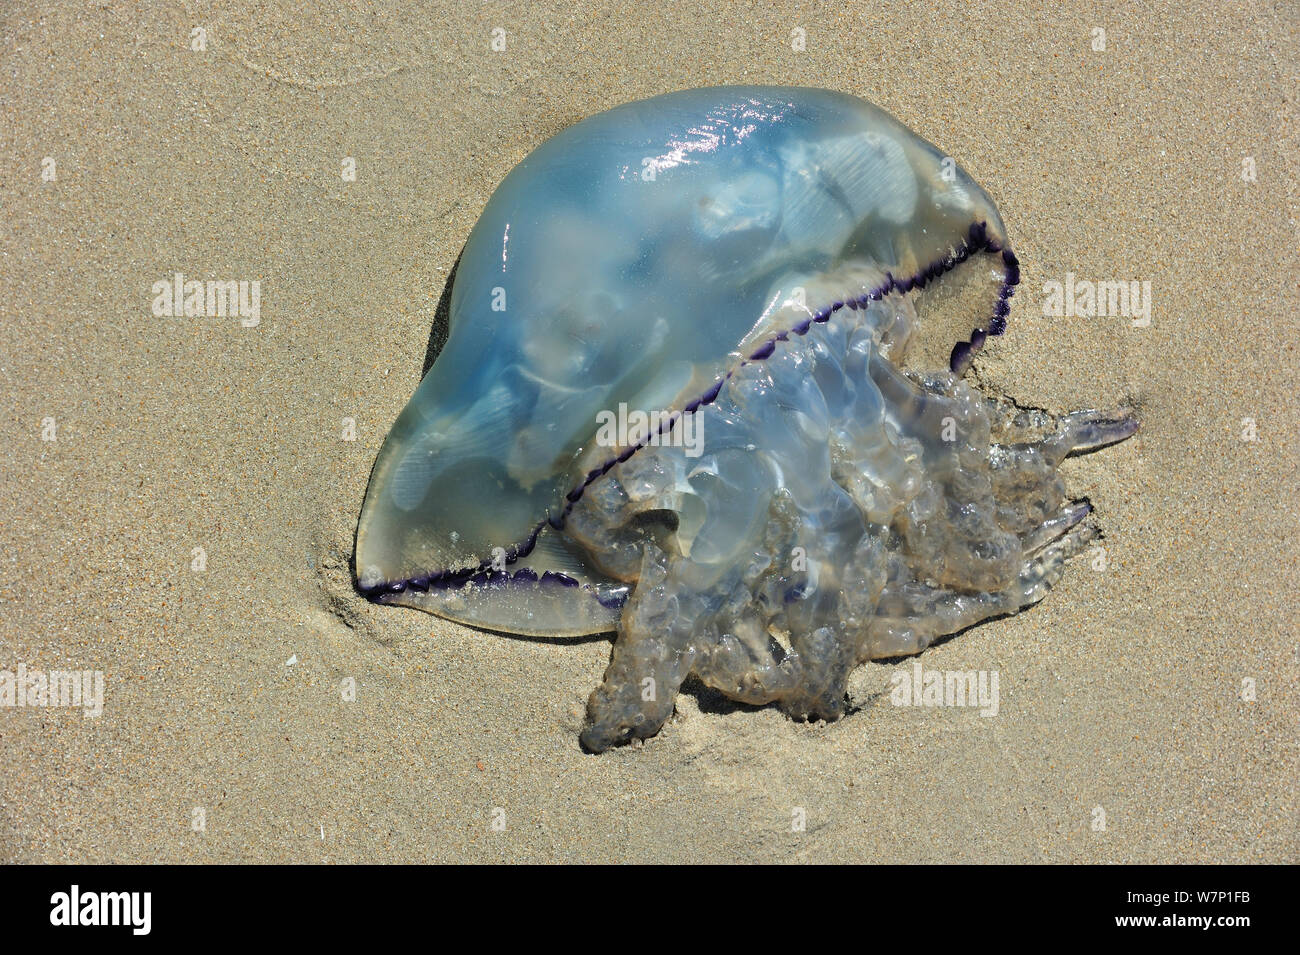 Barrel jellyfish (Rhizostoma octopus) washed up on beach along the North Sea coast, Nord-Pas-de-Calais, France, August Stock Photo